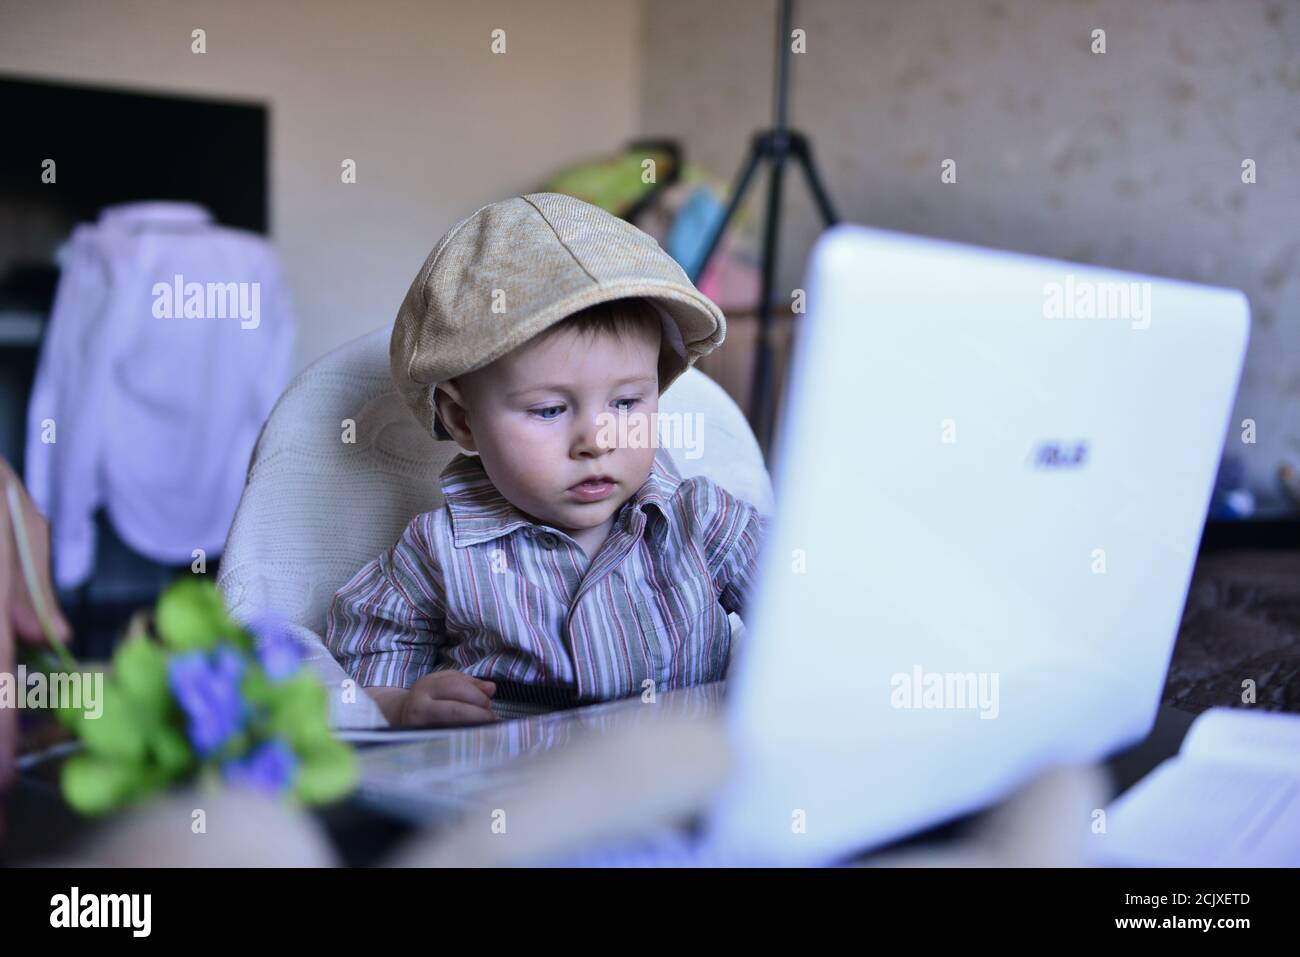 a child in front of a computer is studying or working at home Stock Photo